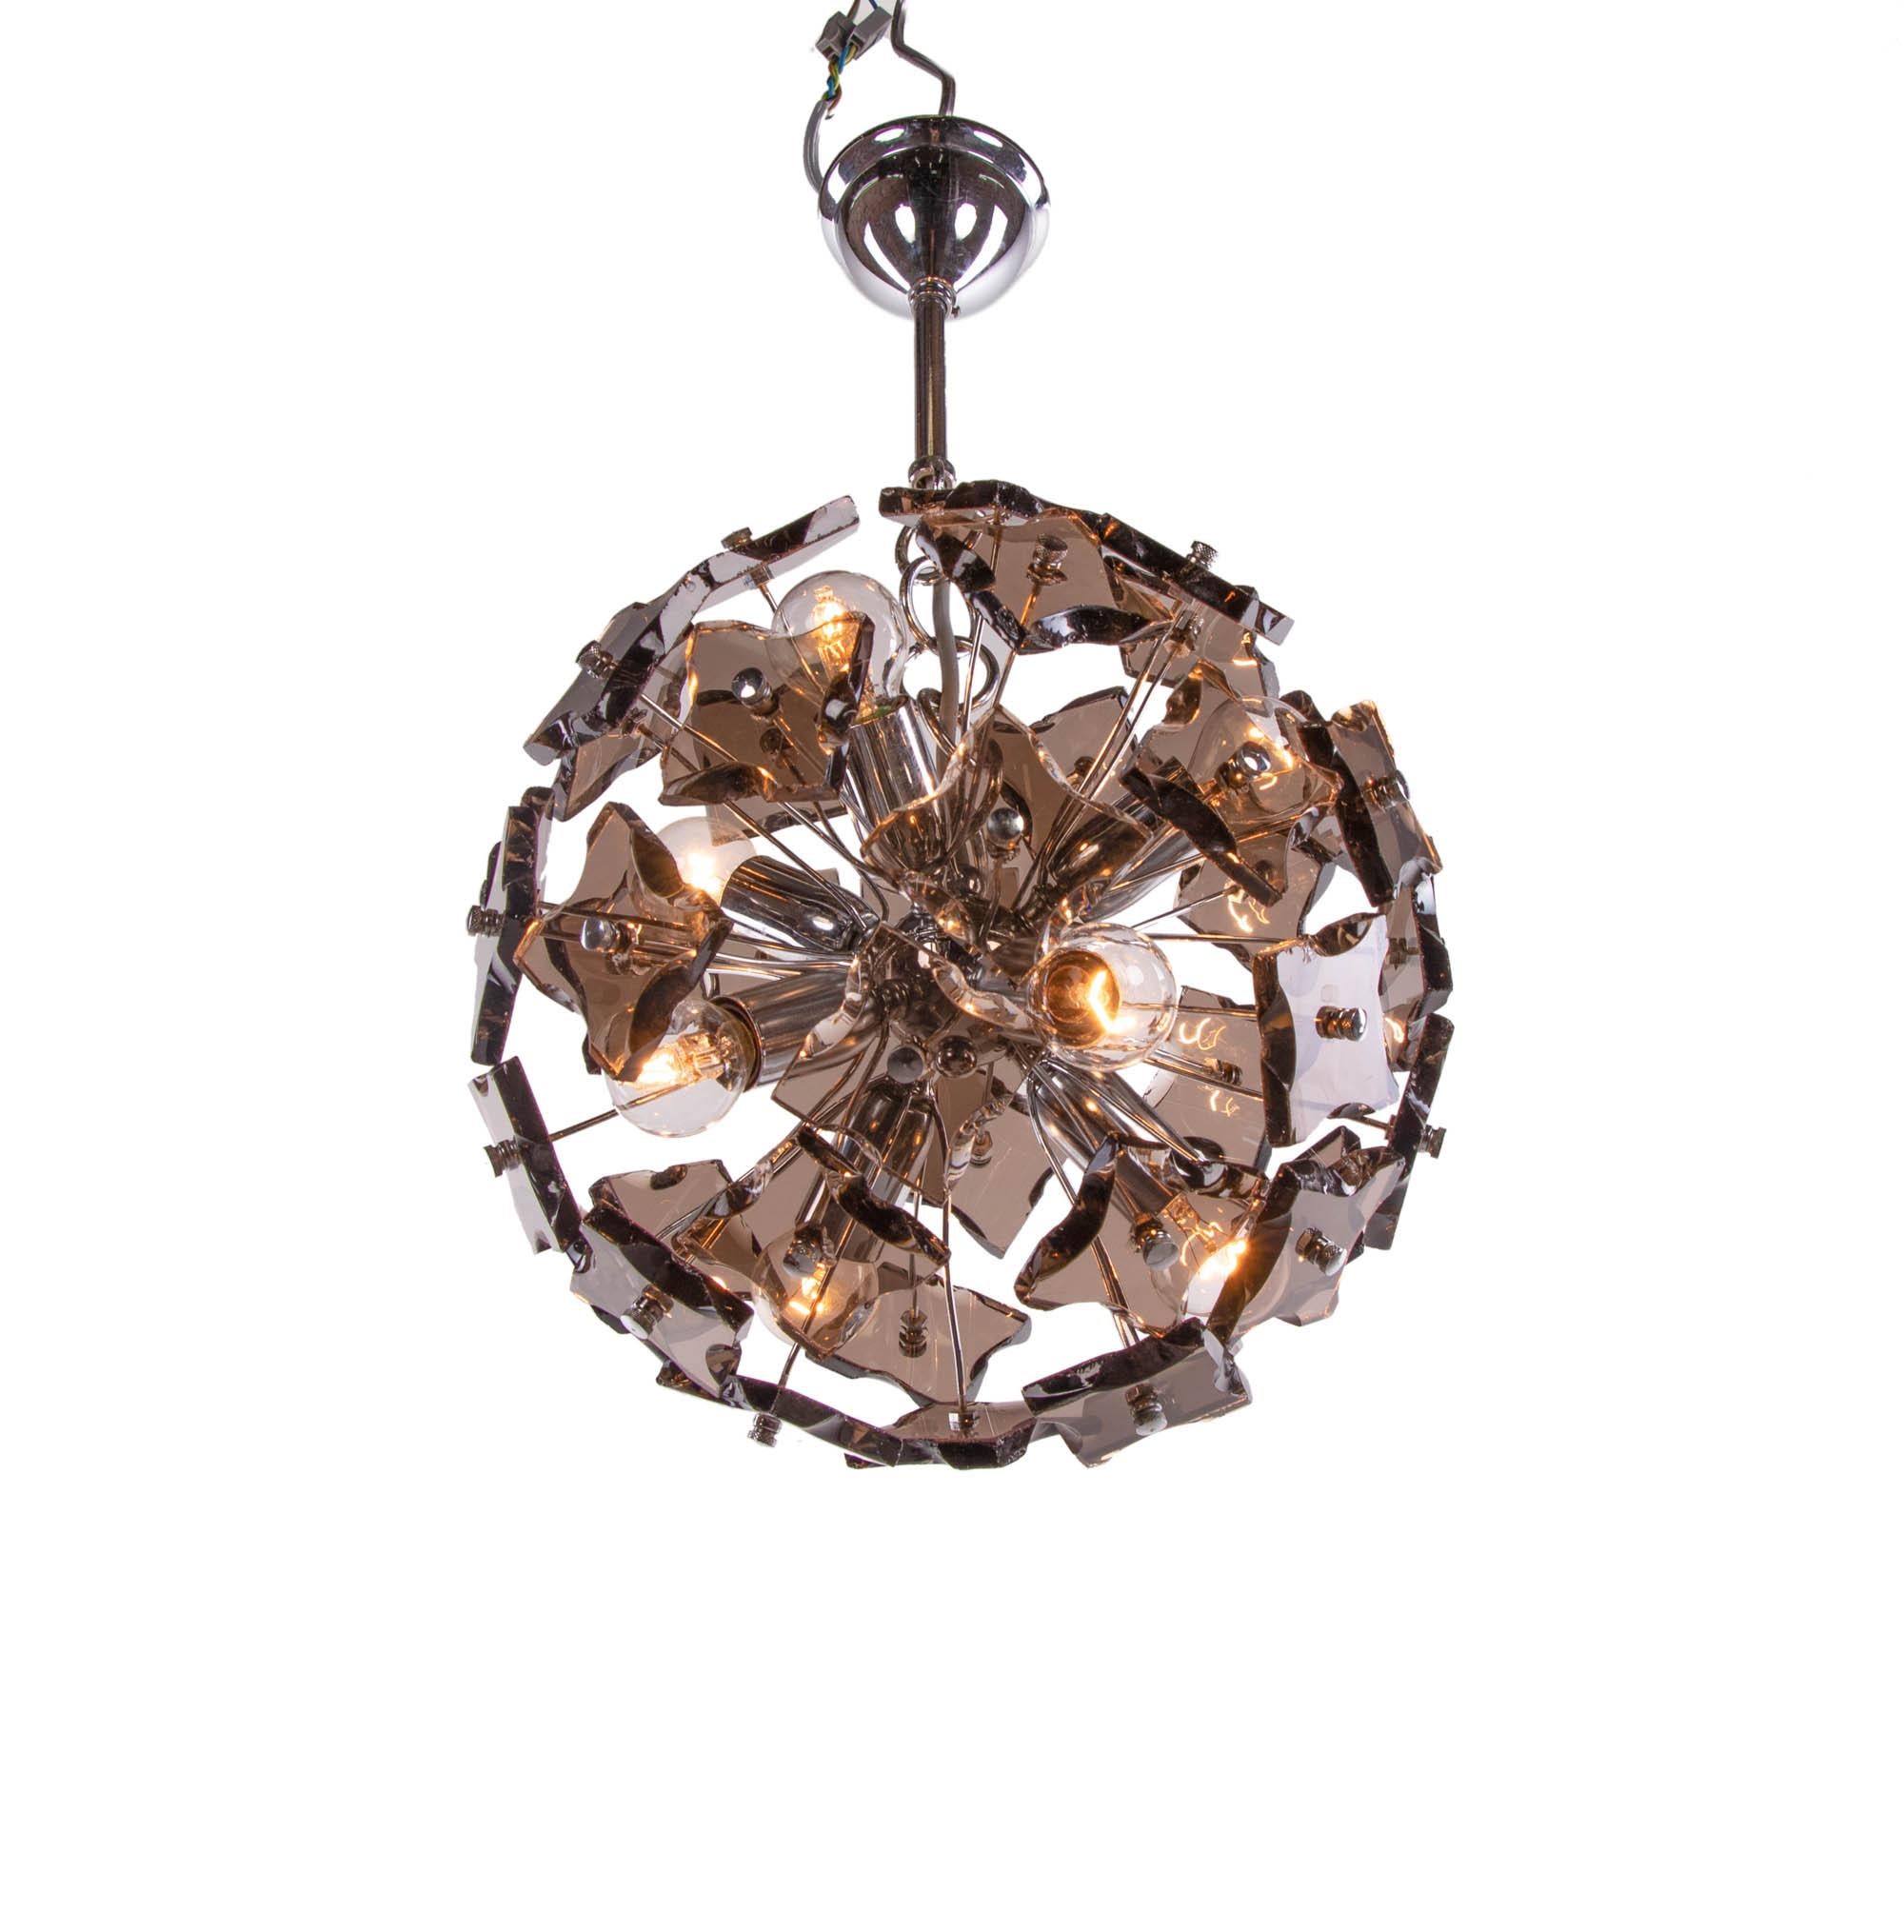 Elegant sputnik chandelier with smoked cut Murano glass on a chromed brass frame. A real eye-catcher and an excellent example of art glass from Italy. Manufactured by Fontana Arte attr., Italy in the 1960s. 

Measures: height 23.6